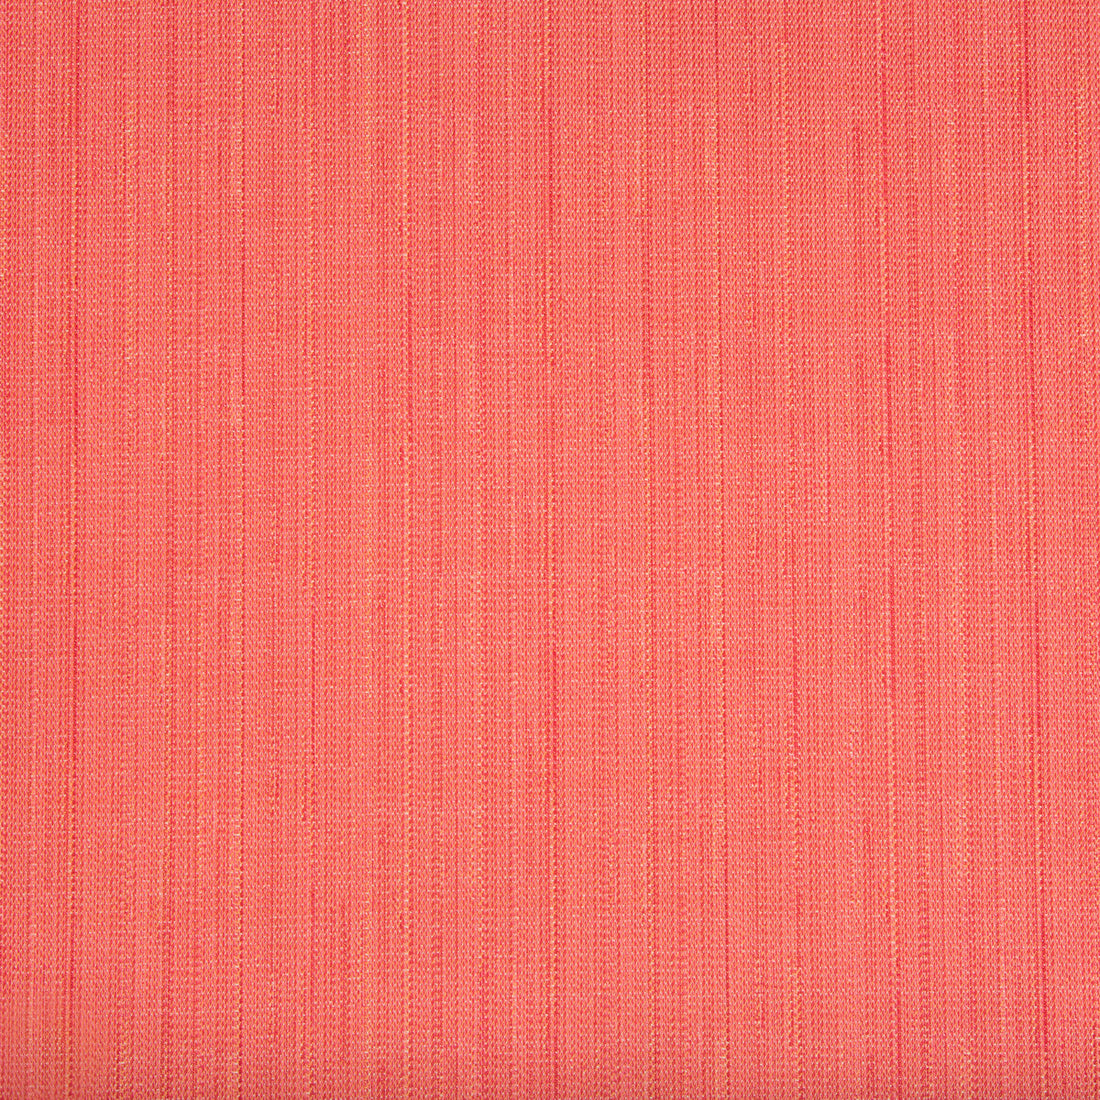 La Coche Strie fabric in pink color - pattern 8017146.7.0 - by Brunschwig &amp; Fils in the En Vacances collection